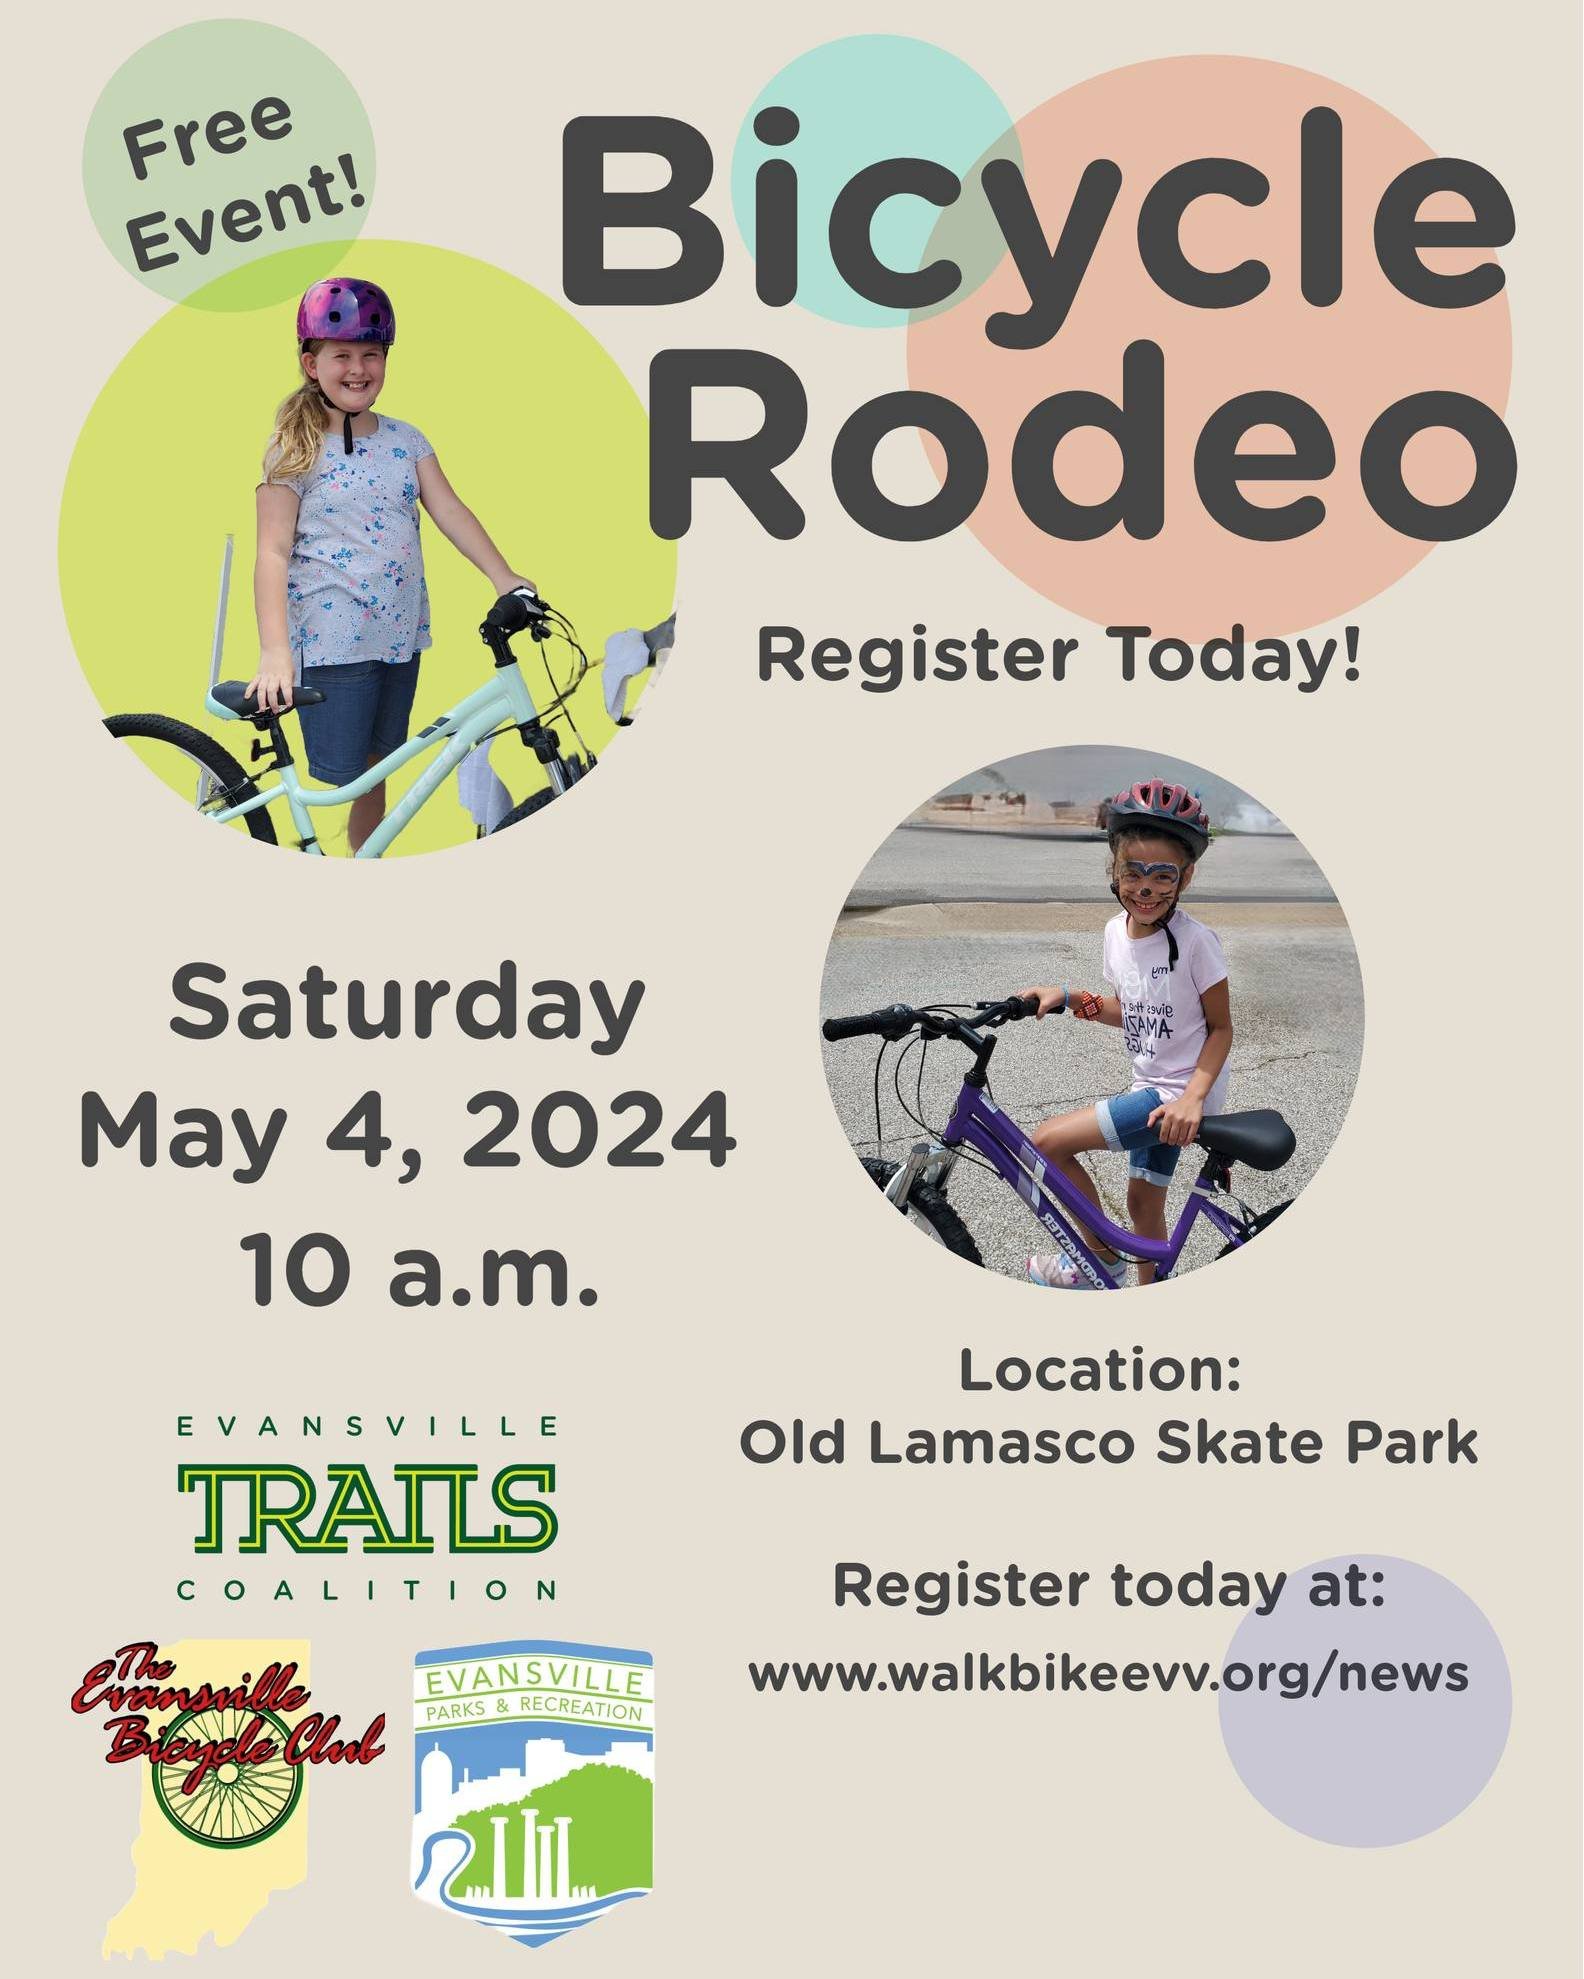 THIS SATURDAY!!!

Evansville Area Trails Coalition, Evansville Parks and Recreation and Evansville Bicycle Club Hosts Fun Educational Children&rsquo;s Bicycle Rodeo Safety Event. Taking place on Saturday, May 4, 2024,10:00 a.m., at the old Lamasco Sk